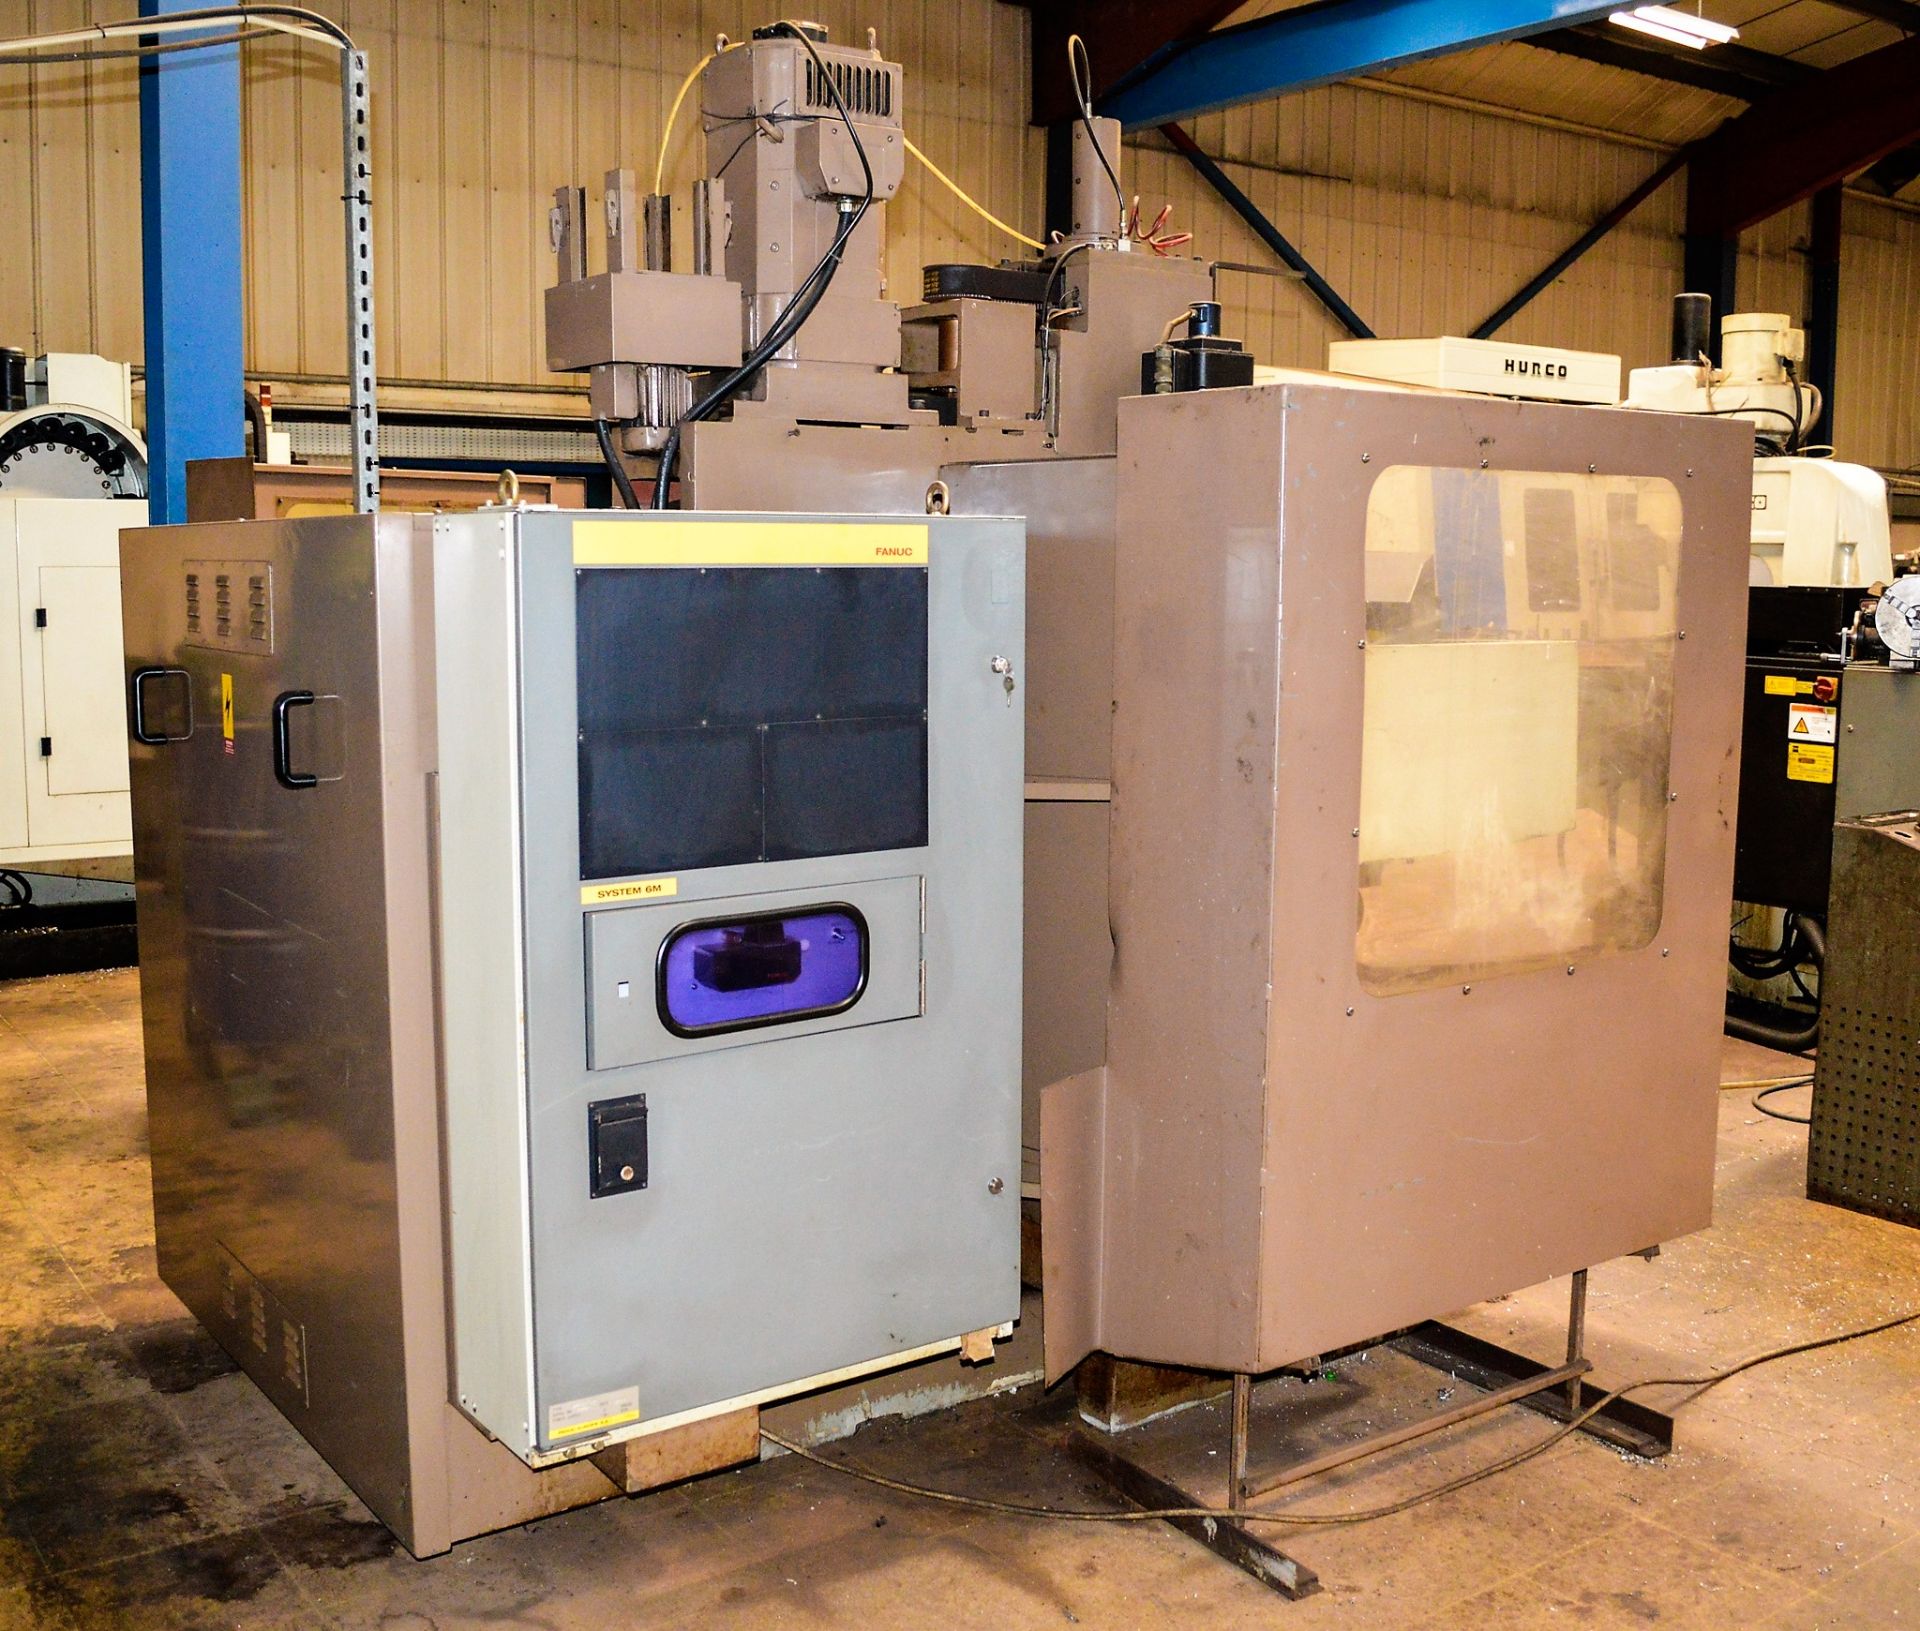 Beaver V5 CNC vertical milling machine S/N: 15157 c/w 48 inch x 10 inch table & Fanuc controls - Image 2 of 5